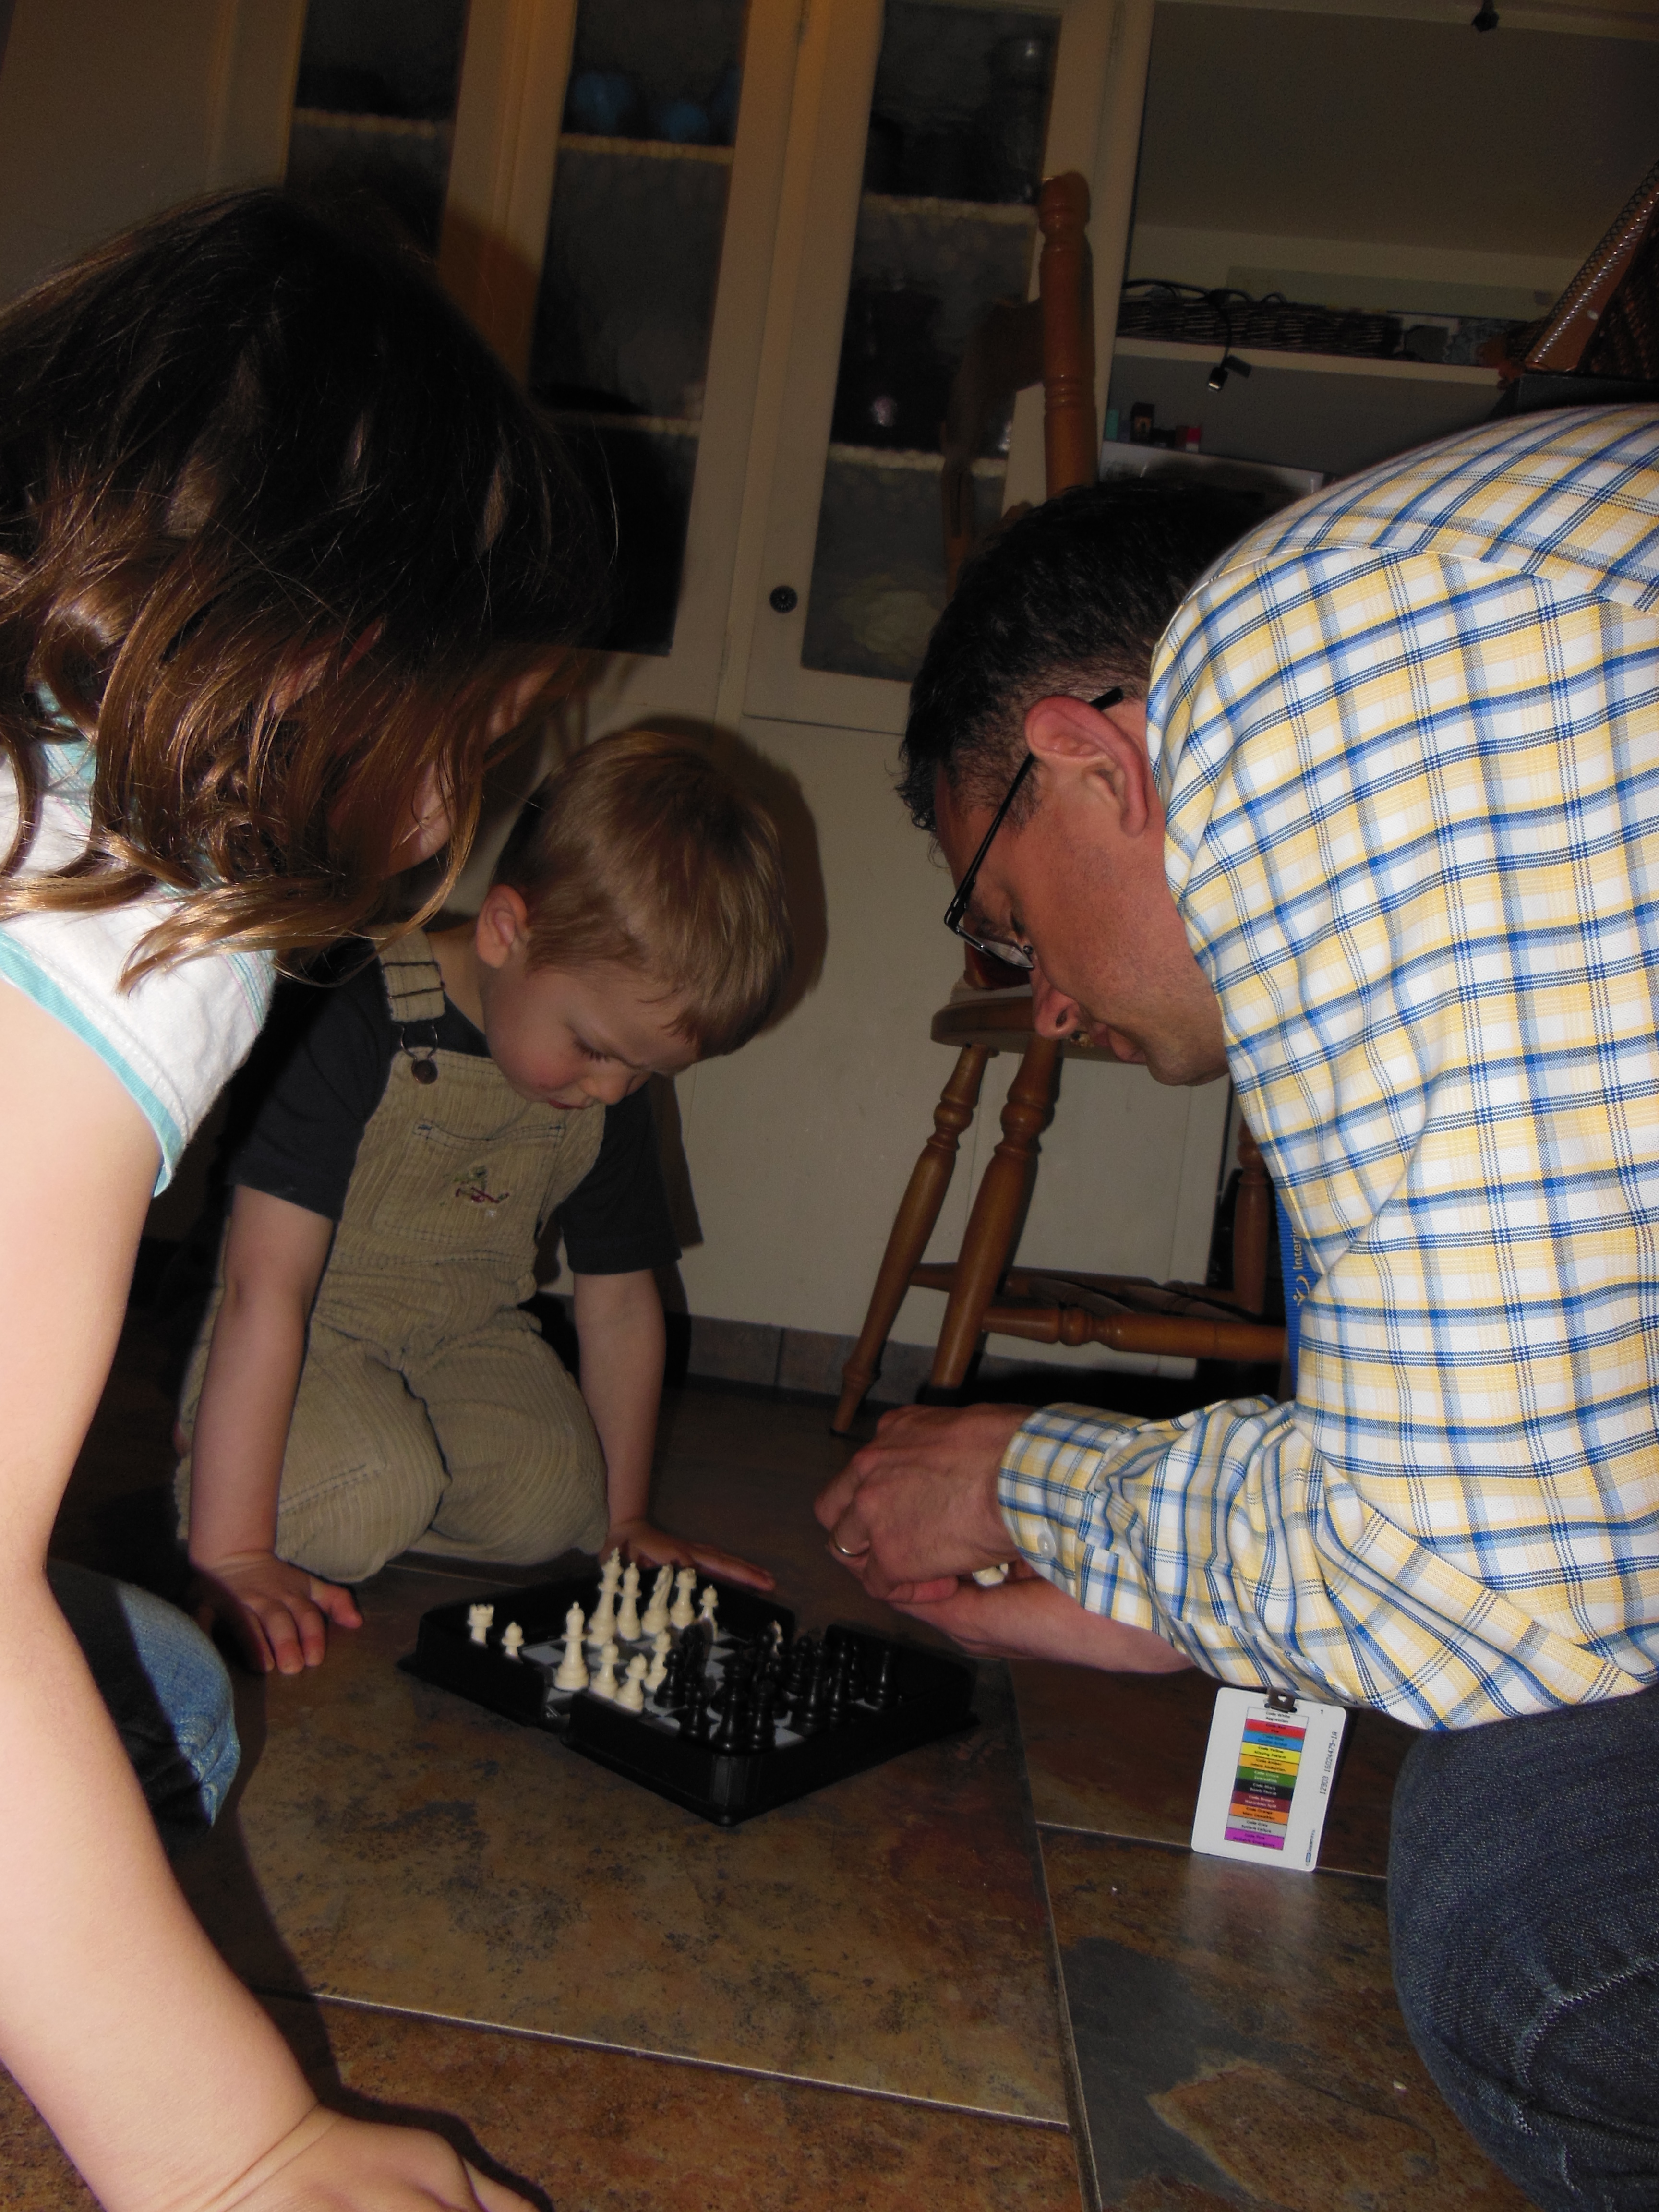 Rachel and Zach playing chess with dad